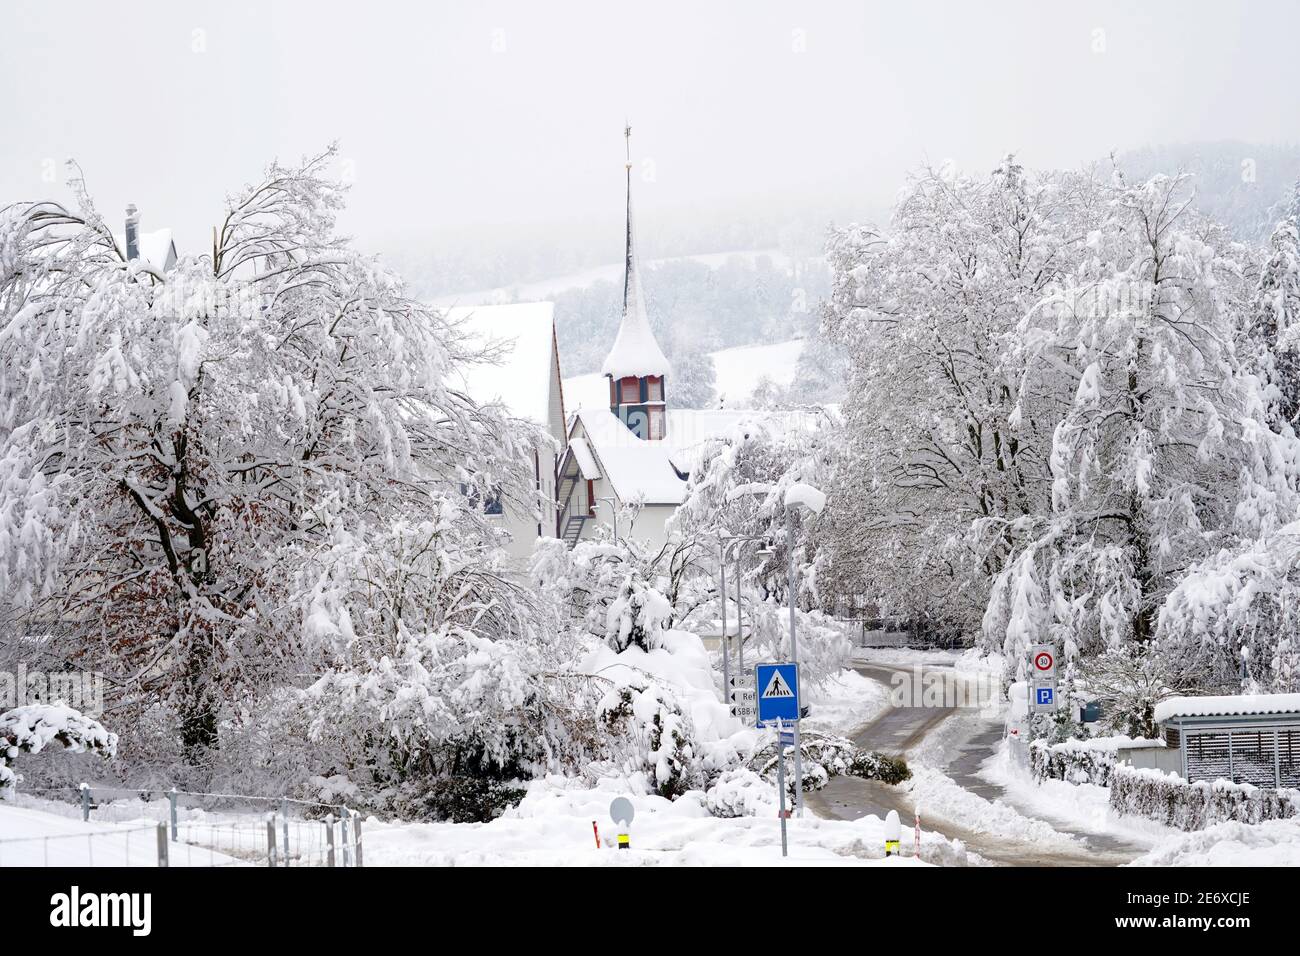 Old reformed church building in Urdorf, Switzerland in winter with a street and crossroad in foreground, all covered with snow after extreme snowfall Stock Photo